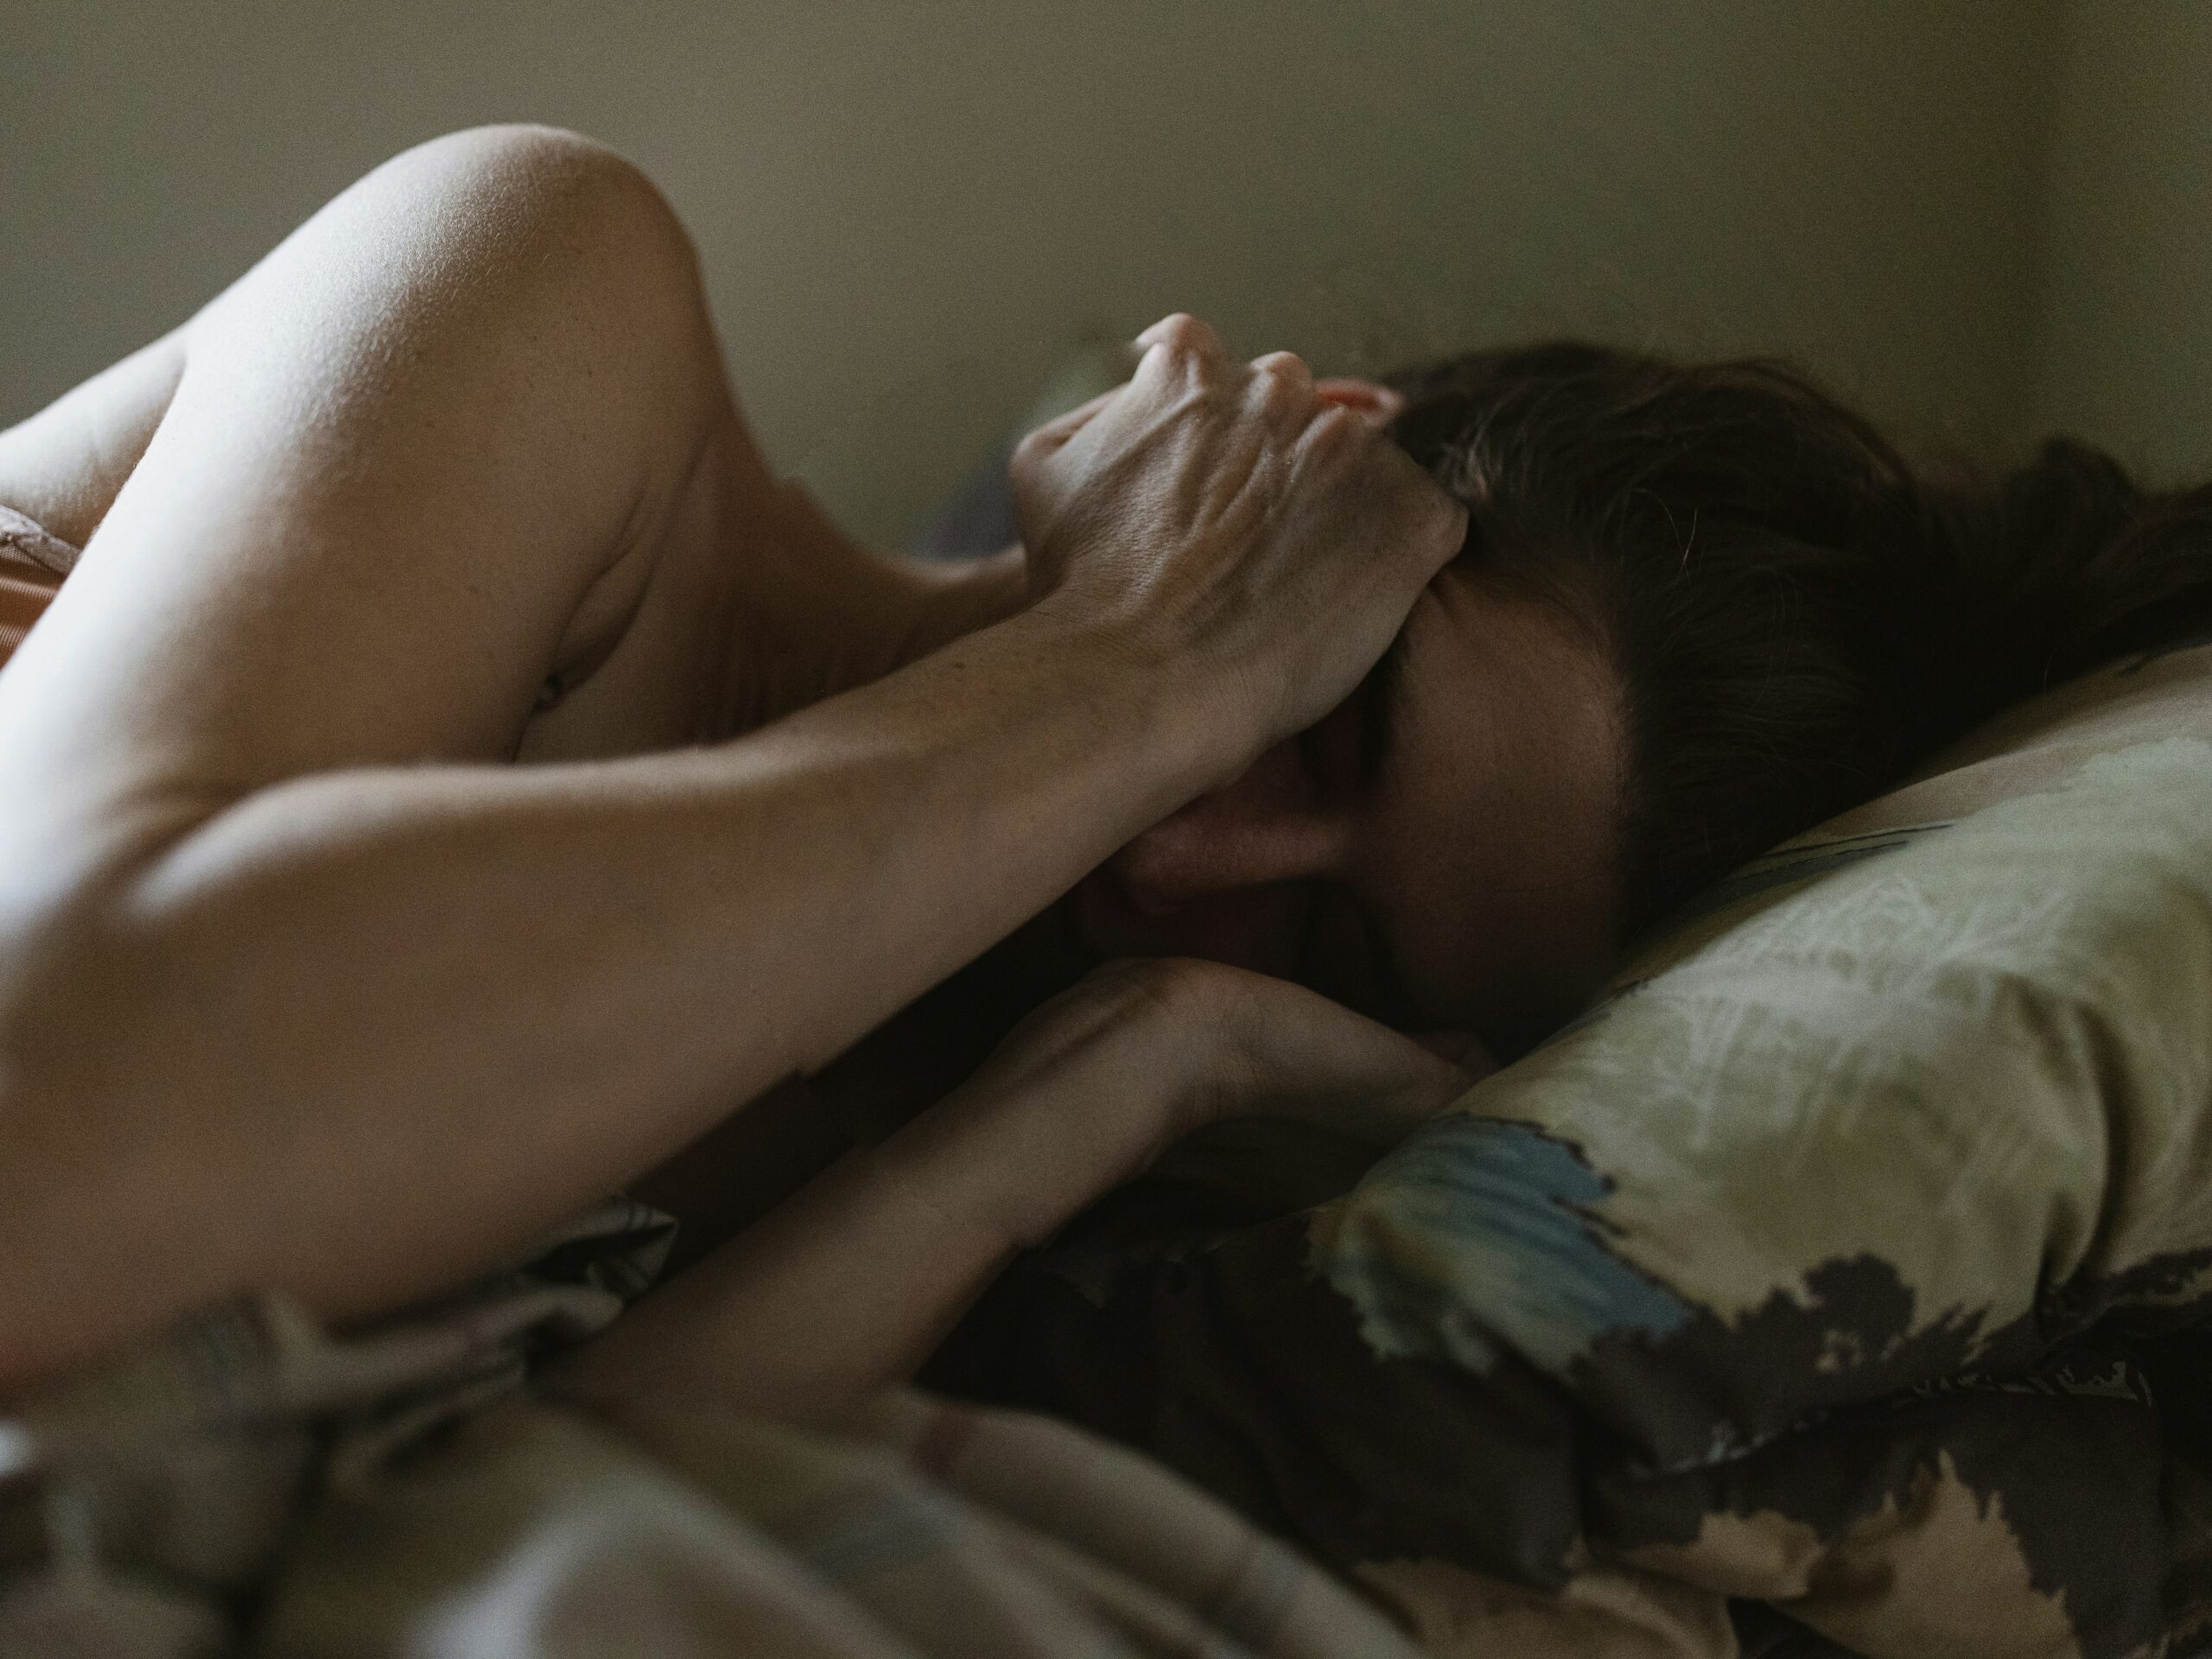 A woman lying in bed with her hands covering her face, appearing distressed. This image illustrates the emotional toll of abuse and the importance of domestic violence services for support and recovery.